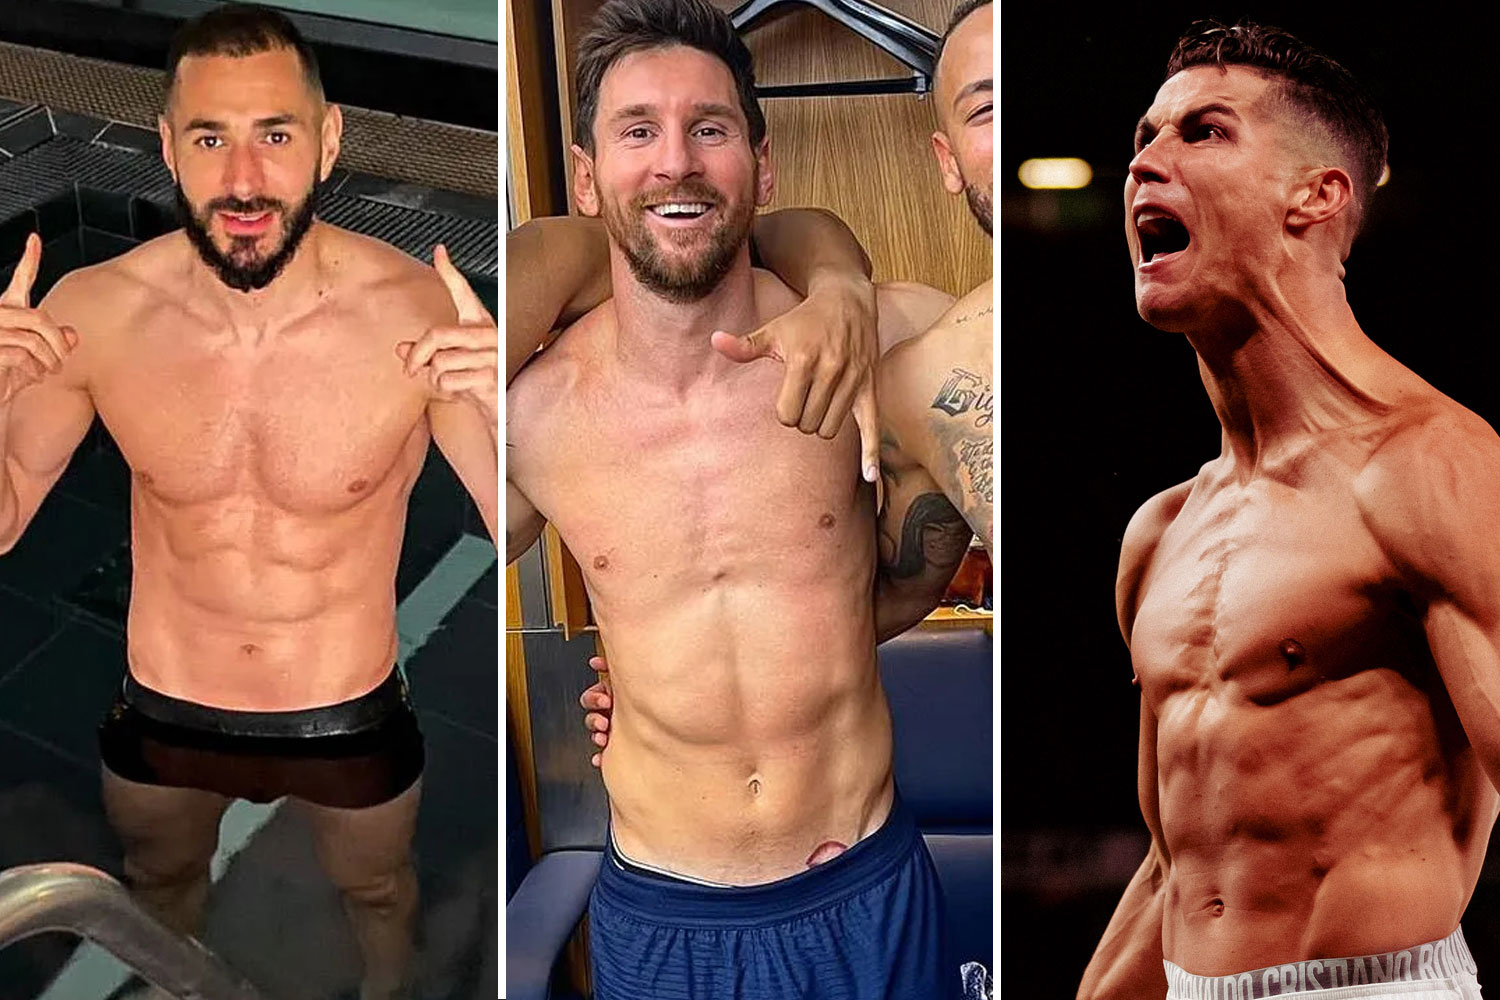 KarimBenzema and Lionel Messi all consume the same diet of SEAWEED in order to stay in peak shape.